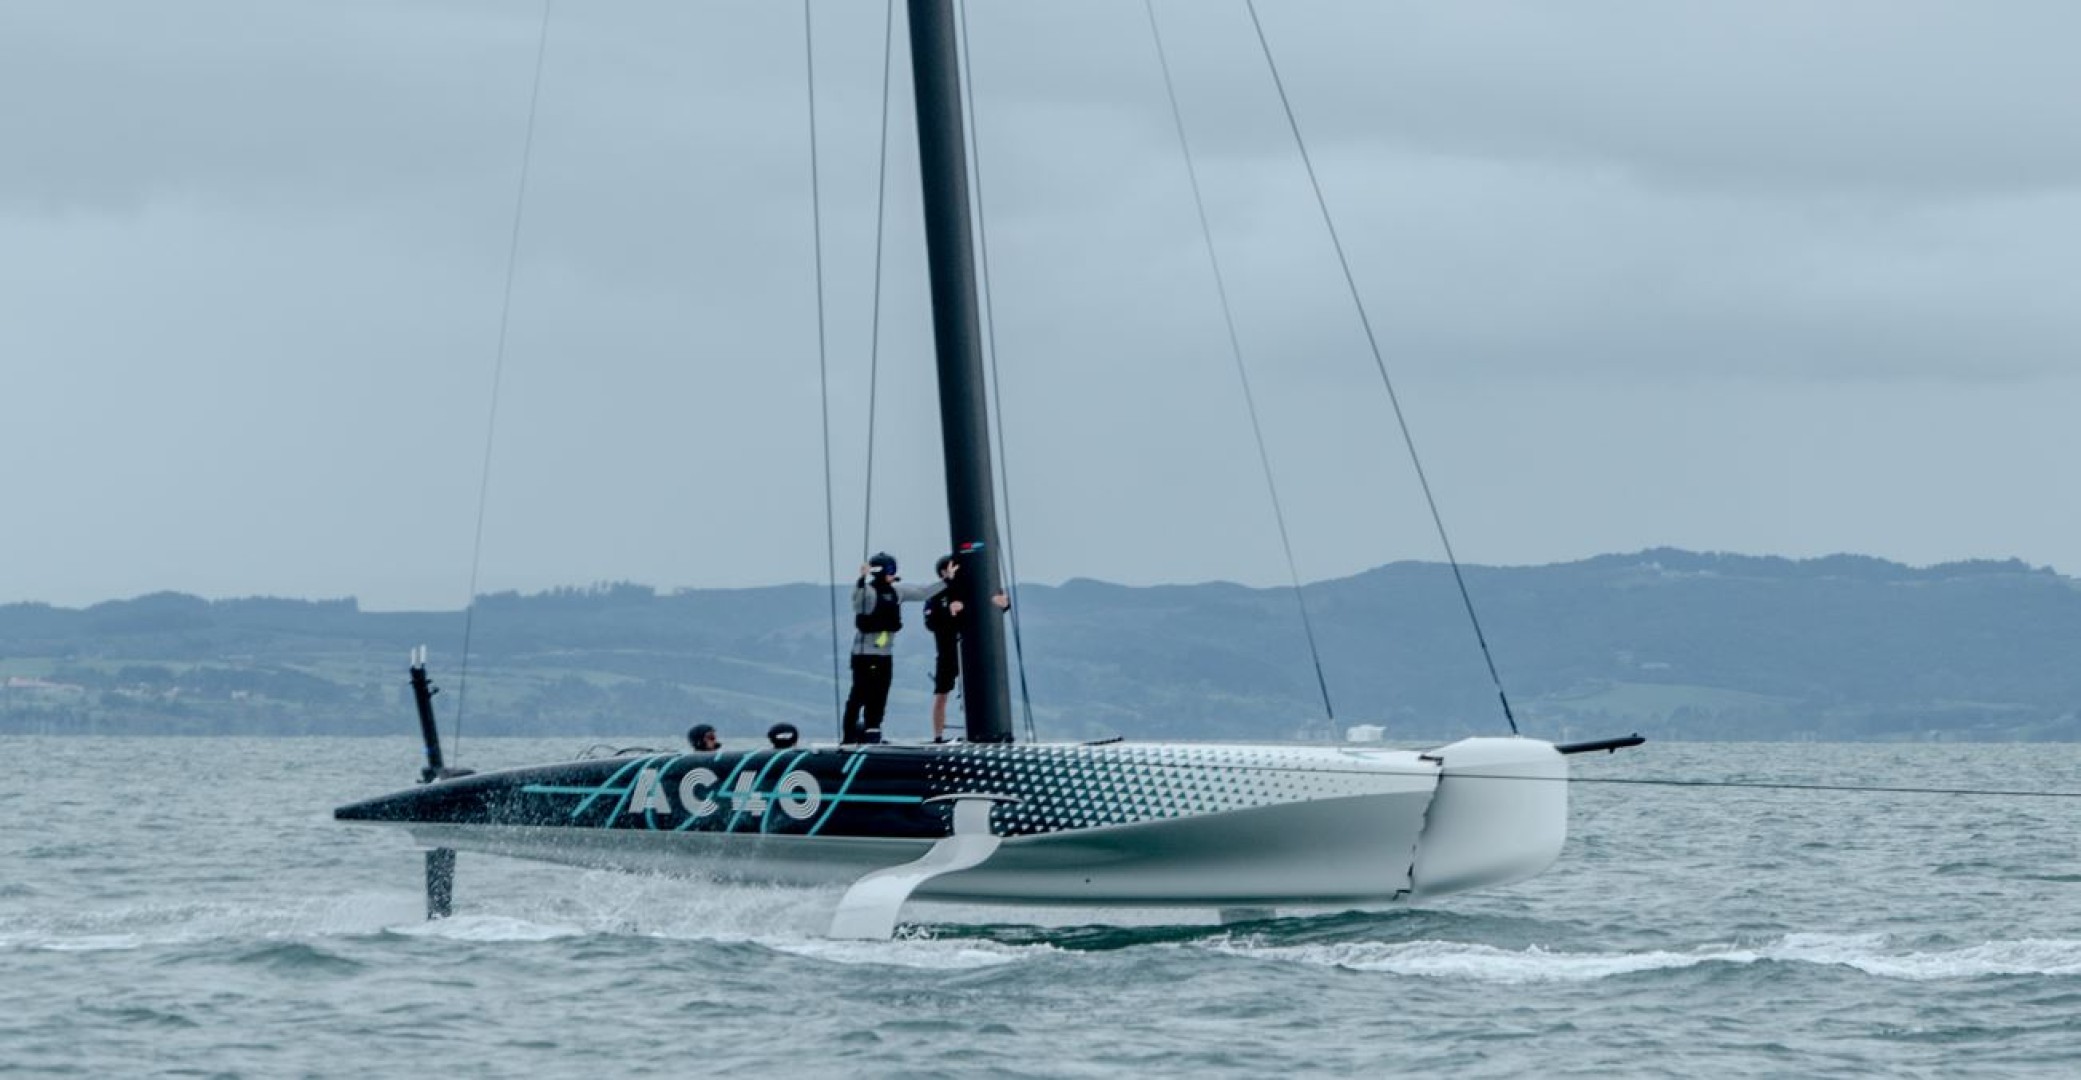 ETNZ AC40 in testing configuration suffers damage during sailing